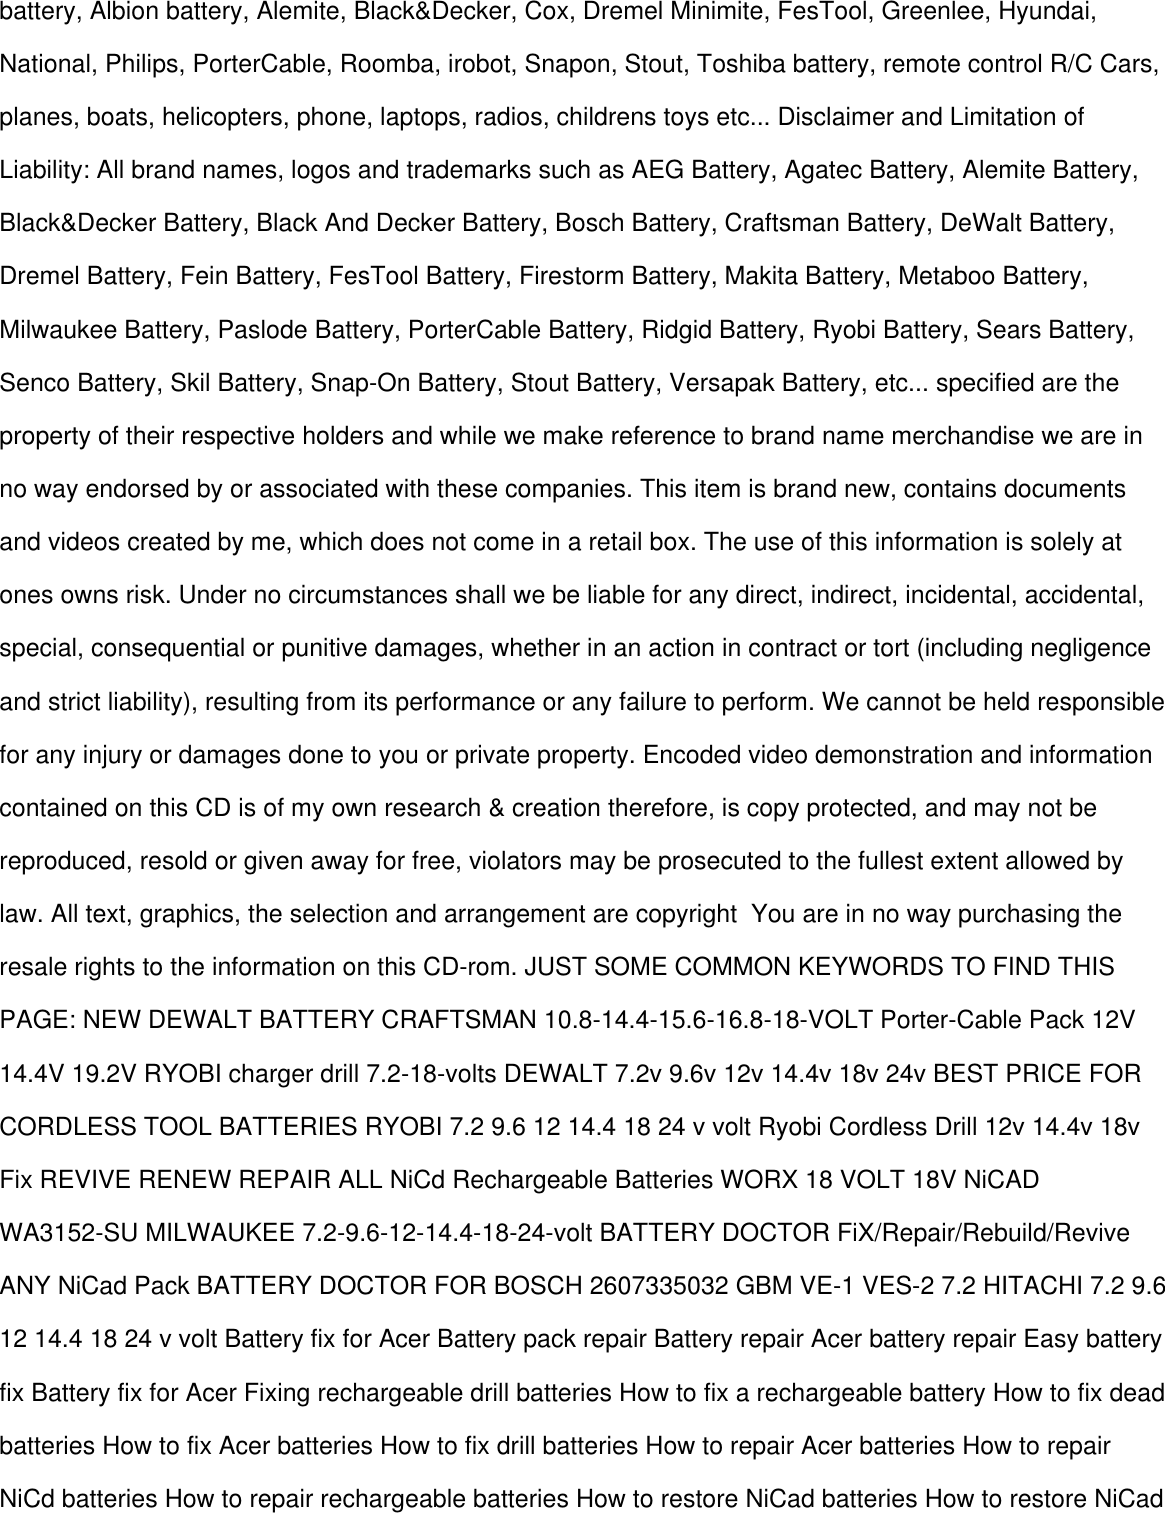 Page 2 of 7 - !! 126414990-battery Doctor Fix Repair Rebuild Any Nicad Battery